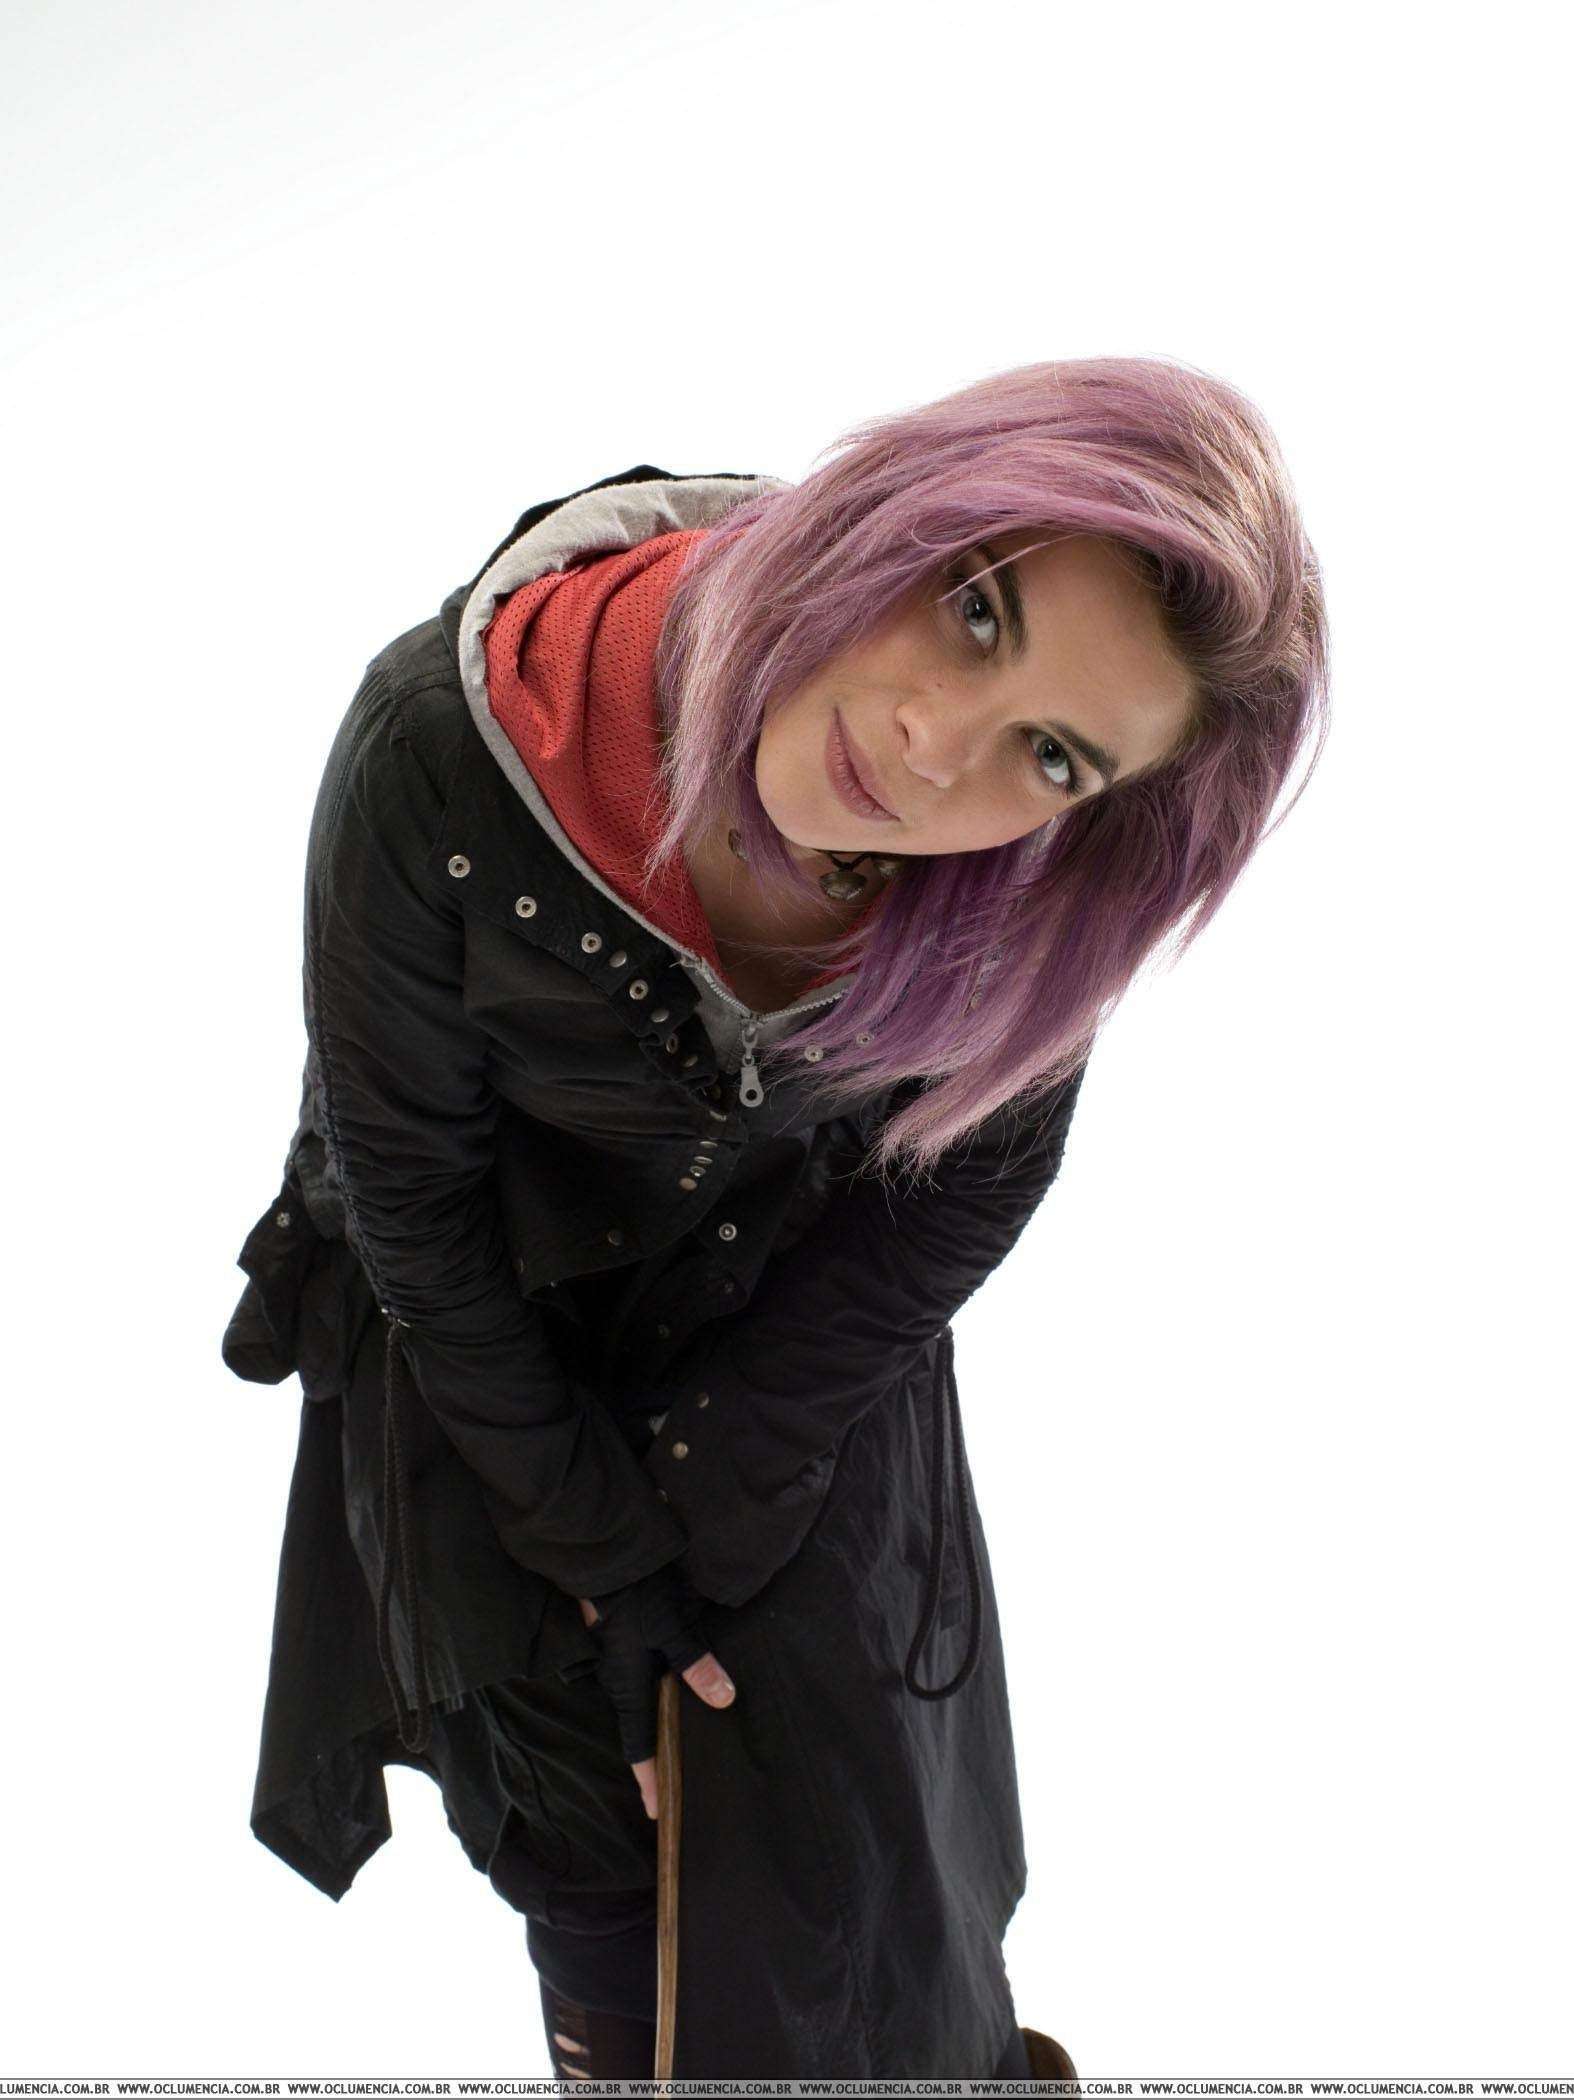 Nymphadora Tonks appearance in the Order of the Phoenix ...